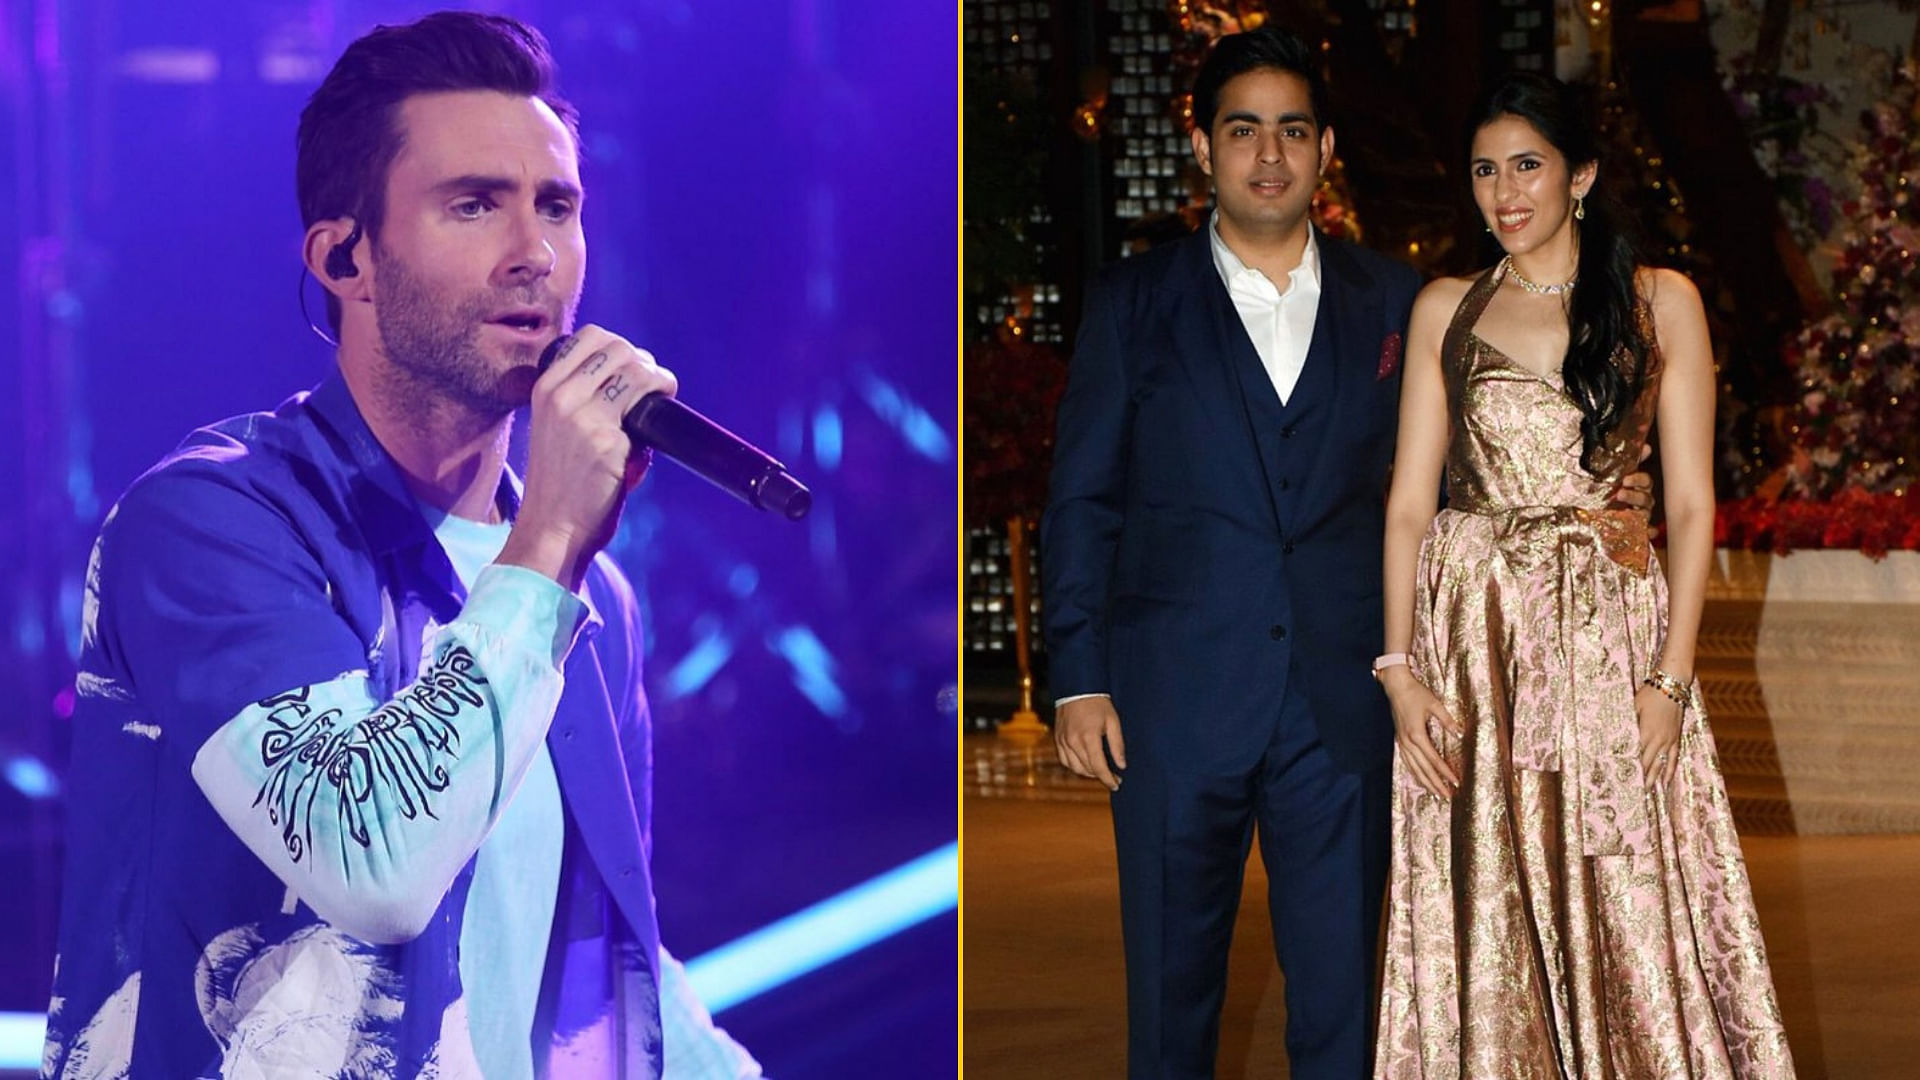 Maroon 5, fronted by singer Adam Levine, is reportedly set to perform at Akash Ambani and Shloka Mehta’s sangeet.